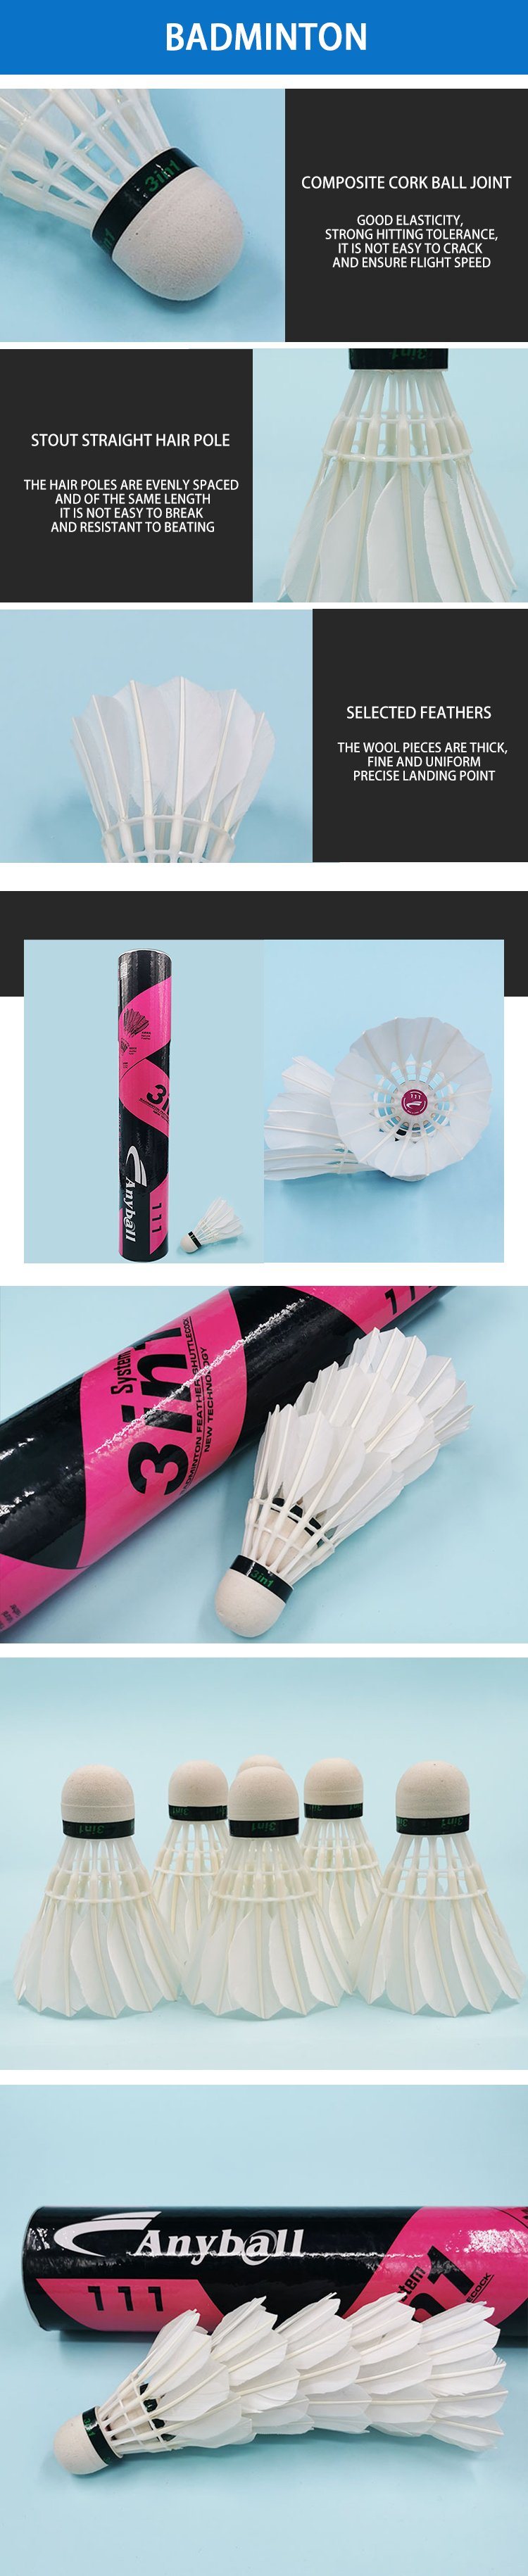 China Factory Wholesale Cheap 3in1 Hybrid Shuttlecock OEM Custom Available Natural White Goose Feather Badminton Shuttlecock